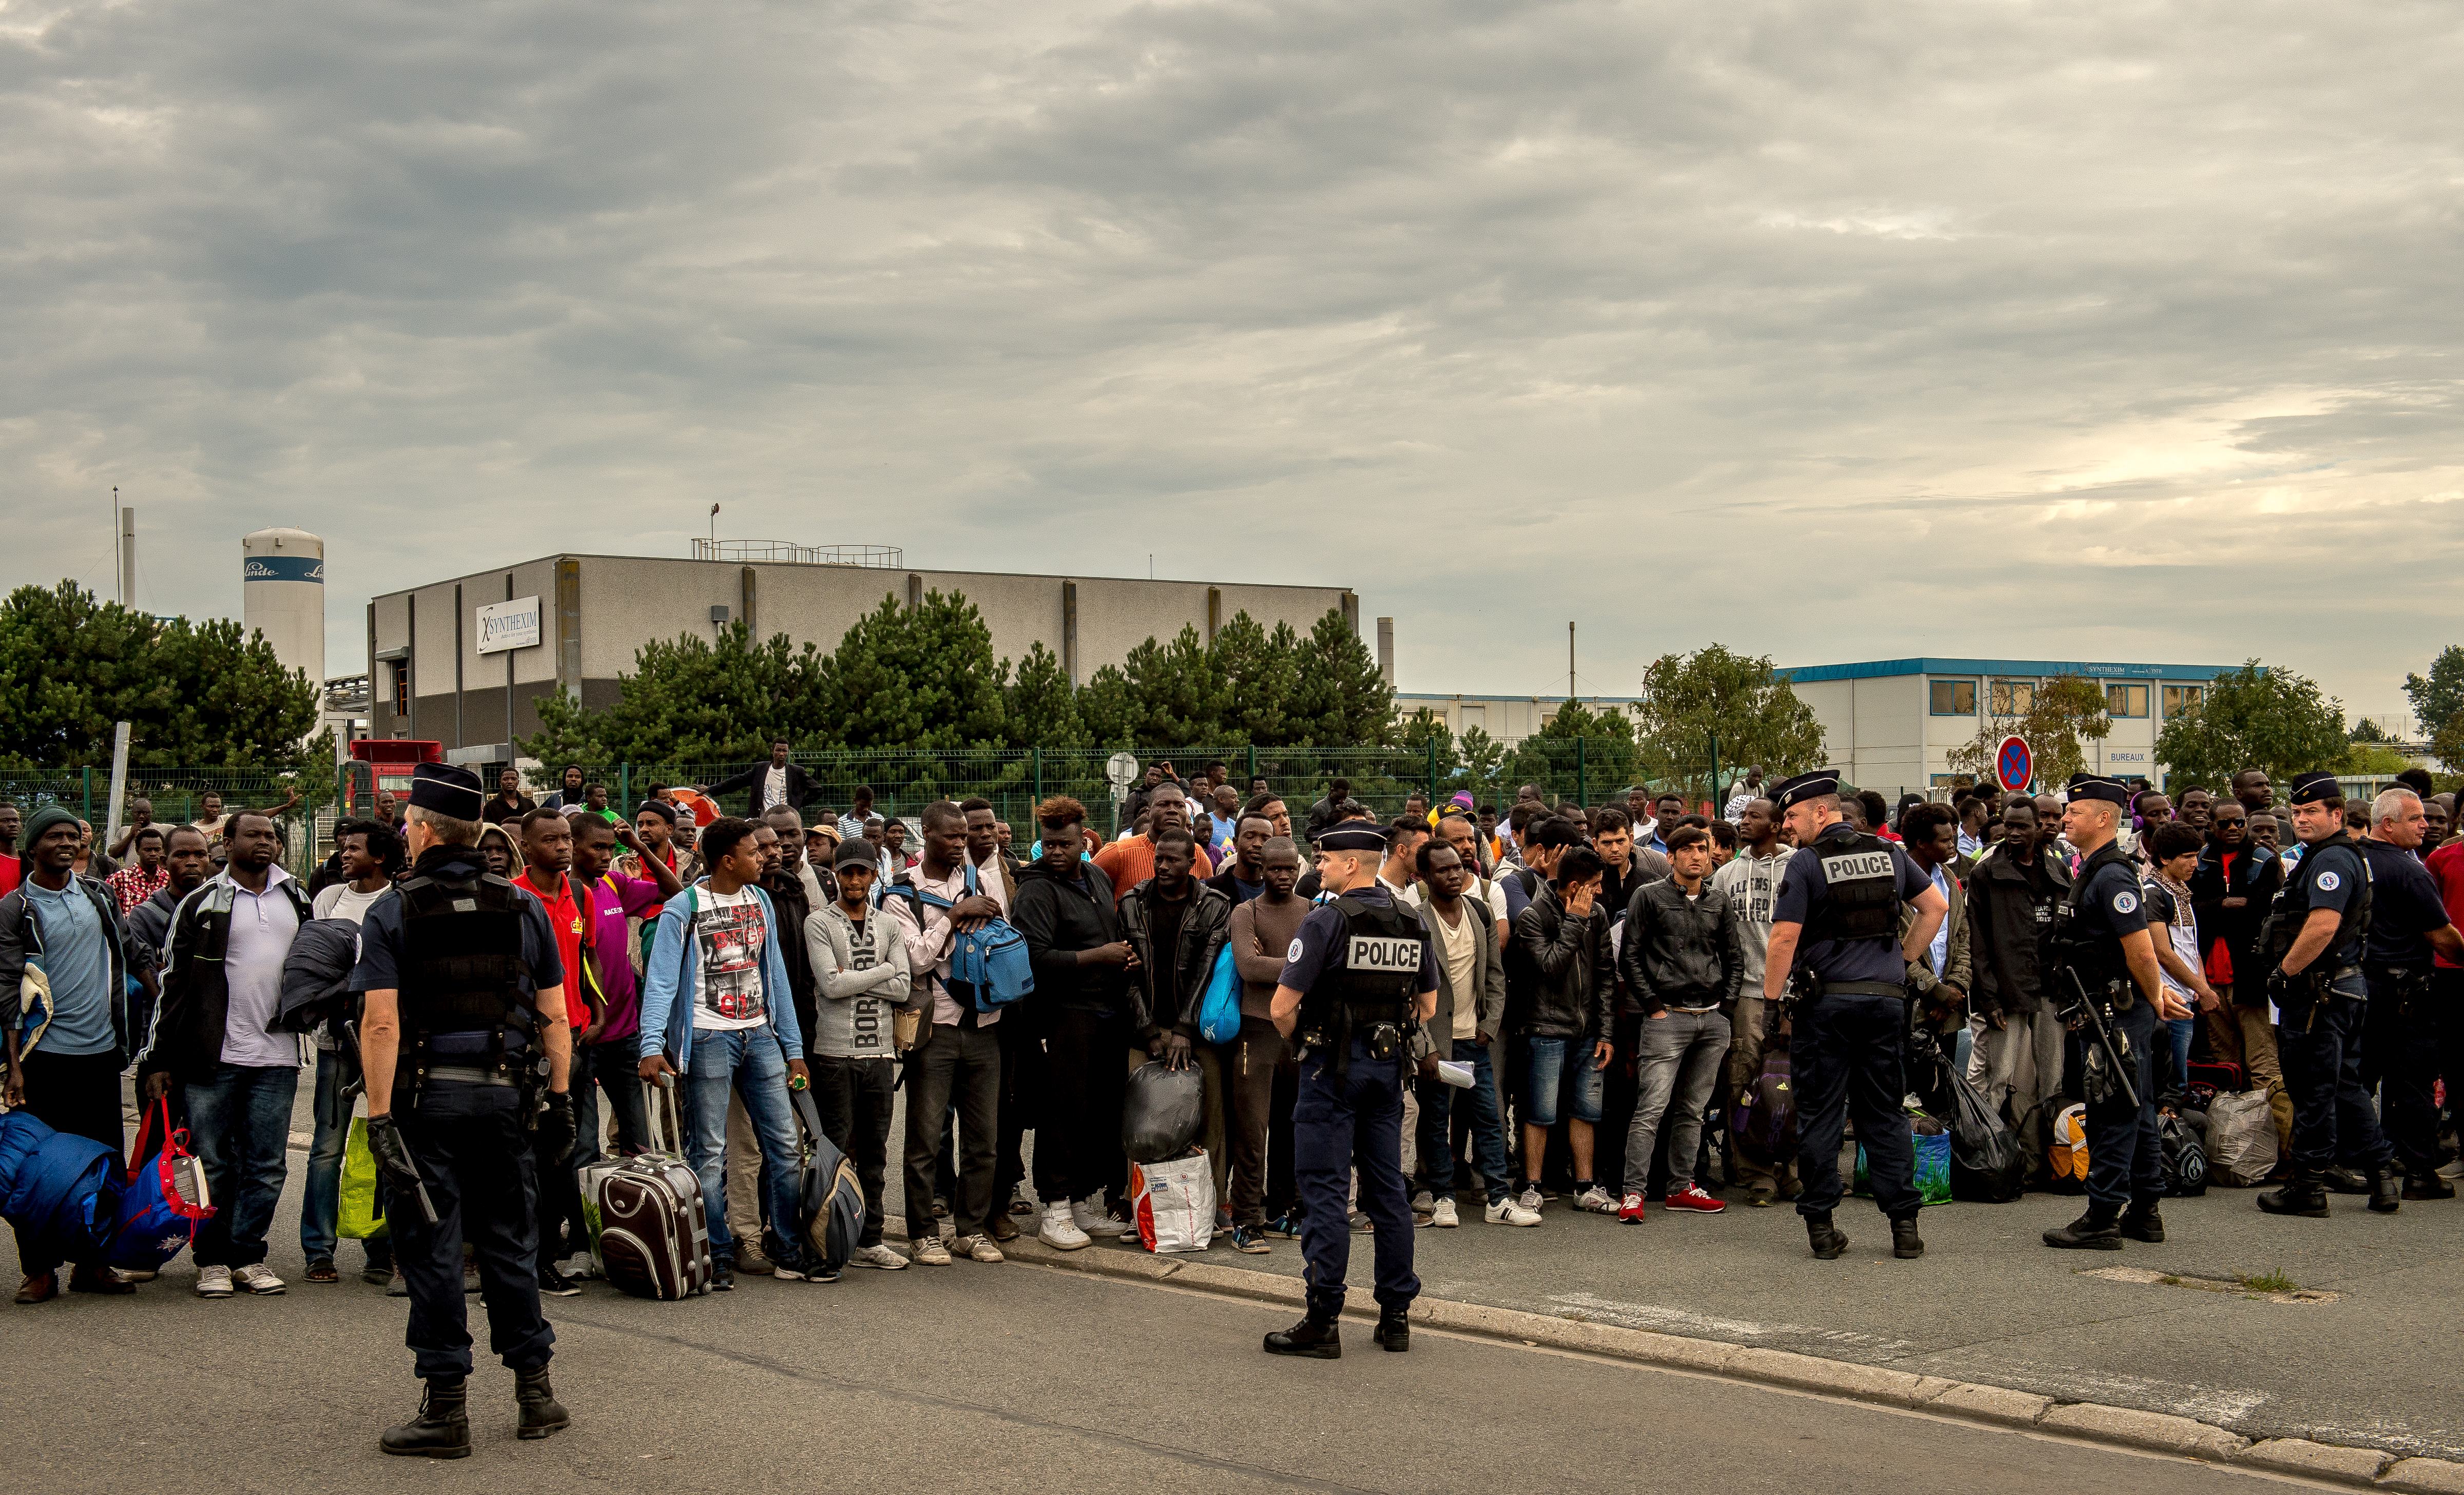 Migrants from the 'Jungle' migrant camp who have been denied access to a bus heading to a "Welcome and orientation centre" (CAO) are gathered under police surveillance, in Calais on Sept. 13, 2016. (Philippe Huguen—AFP/Getty Images)